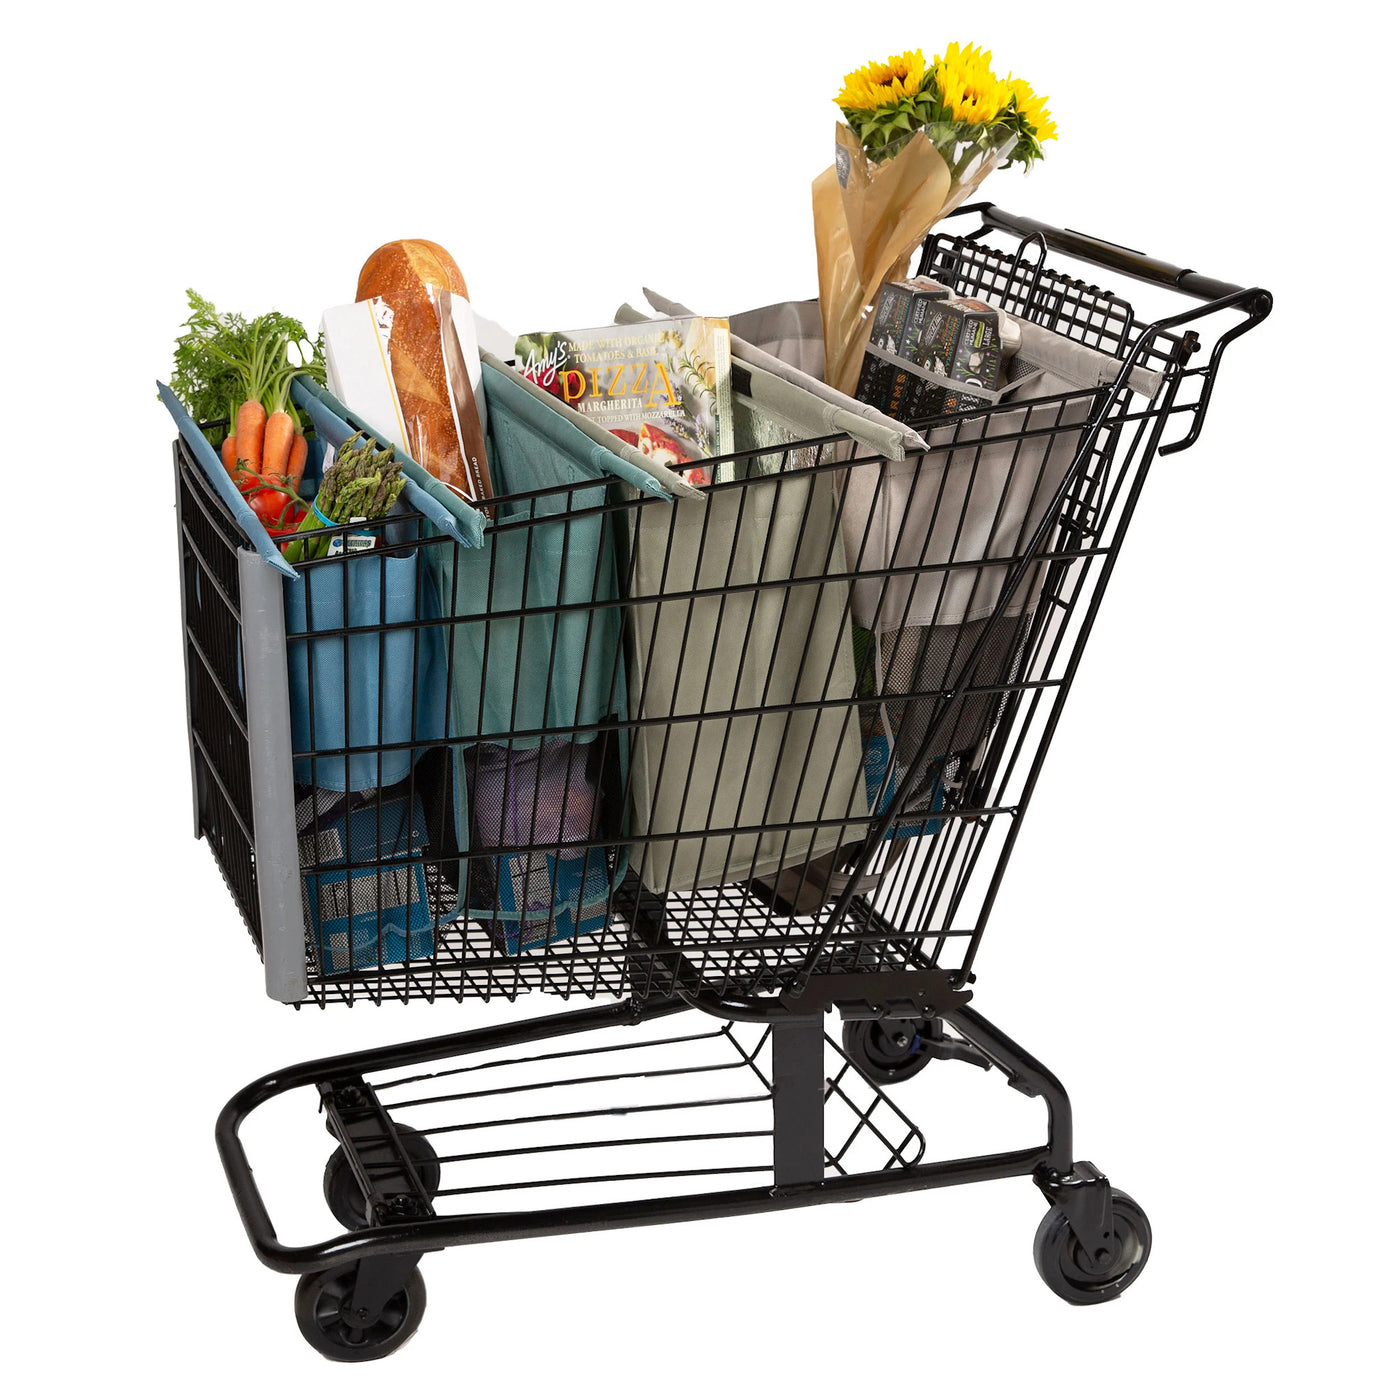 Rolling Shopping Bags: Shopping Bag With Wheels